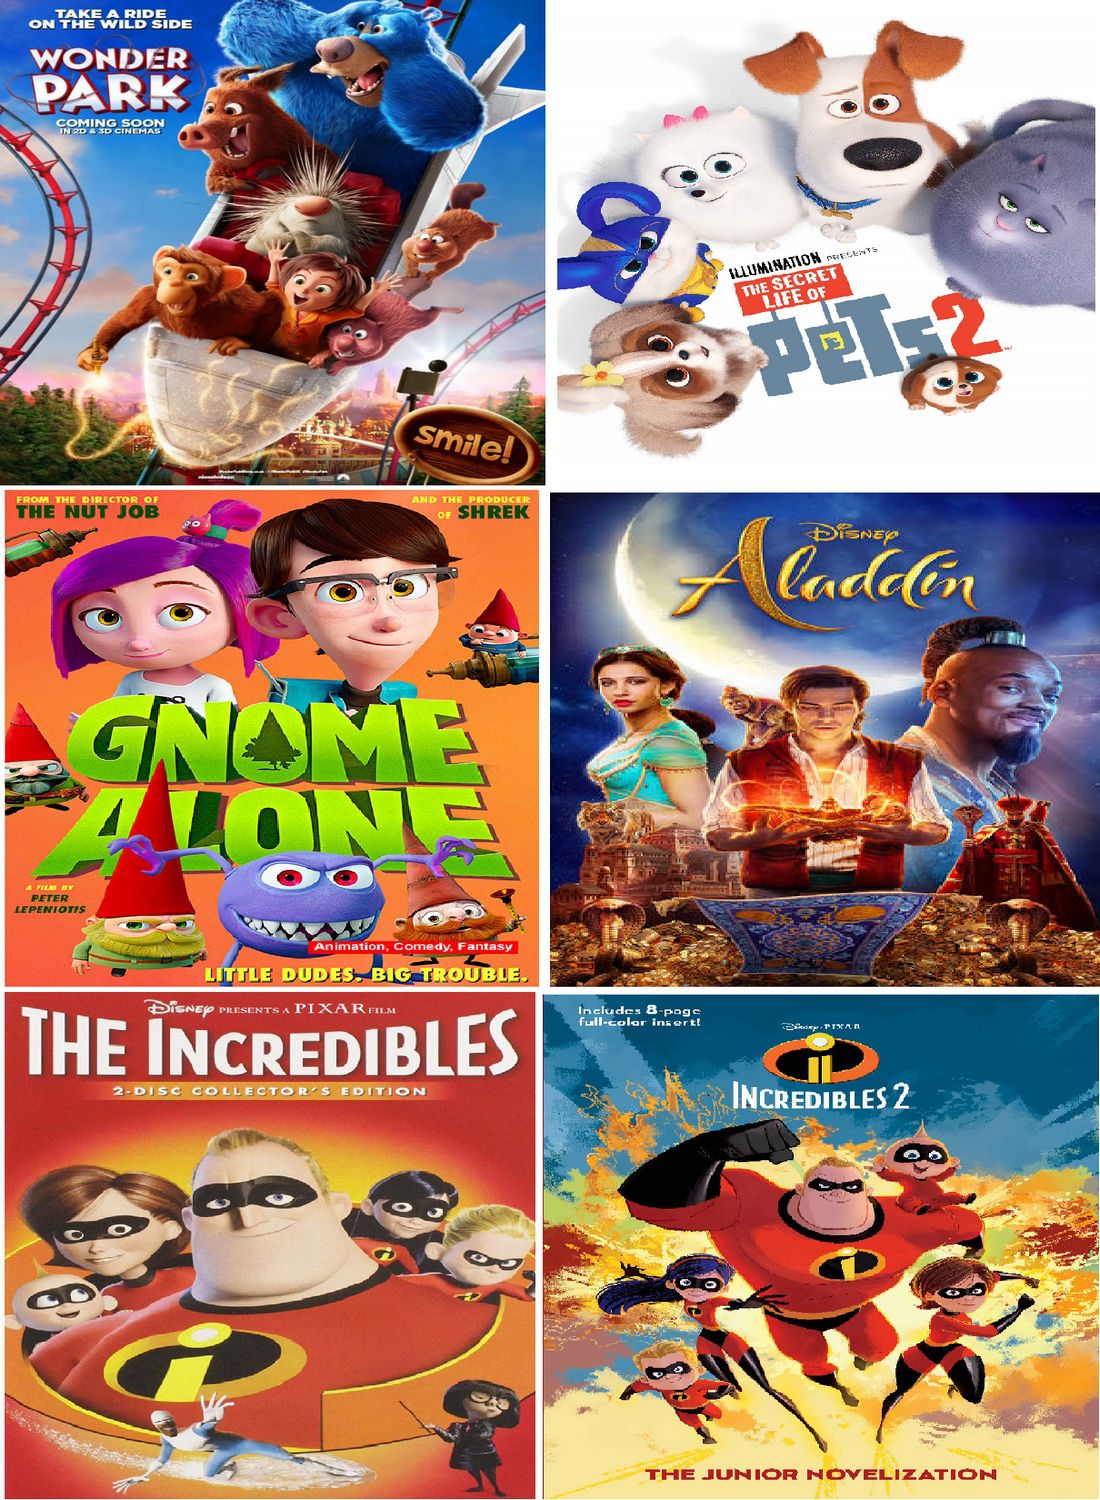 6 cartoon movies Wonder Park, Gnome Alone, Incredibles 1 & 2, Secret Life  of Pets 2 , Aladdin ( DVD )- Hindi: Buy Online at Best Price in India -  Snapdeal